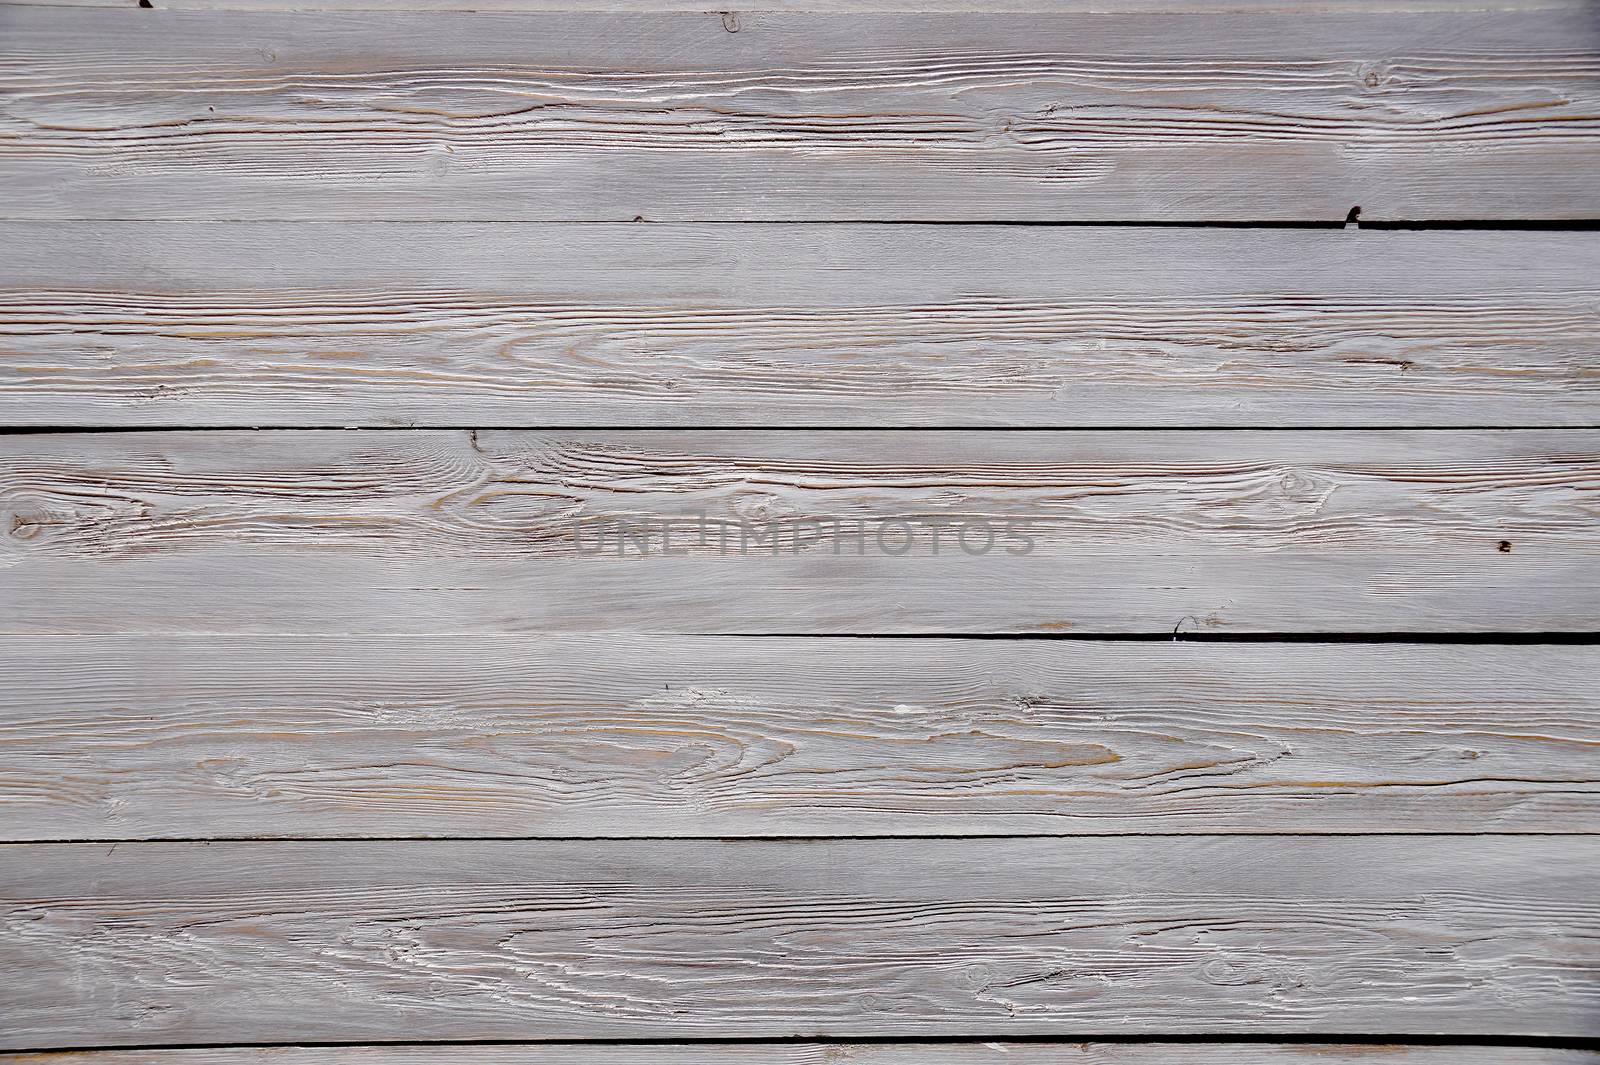 Wooden facing surface by Vadimdem